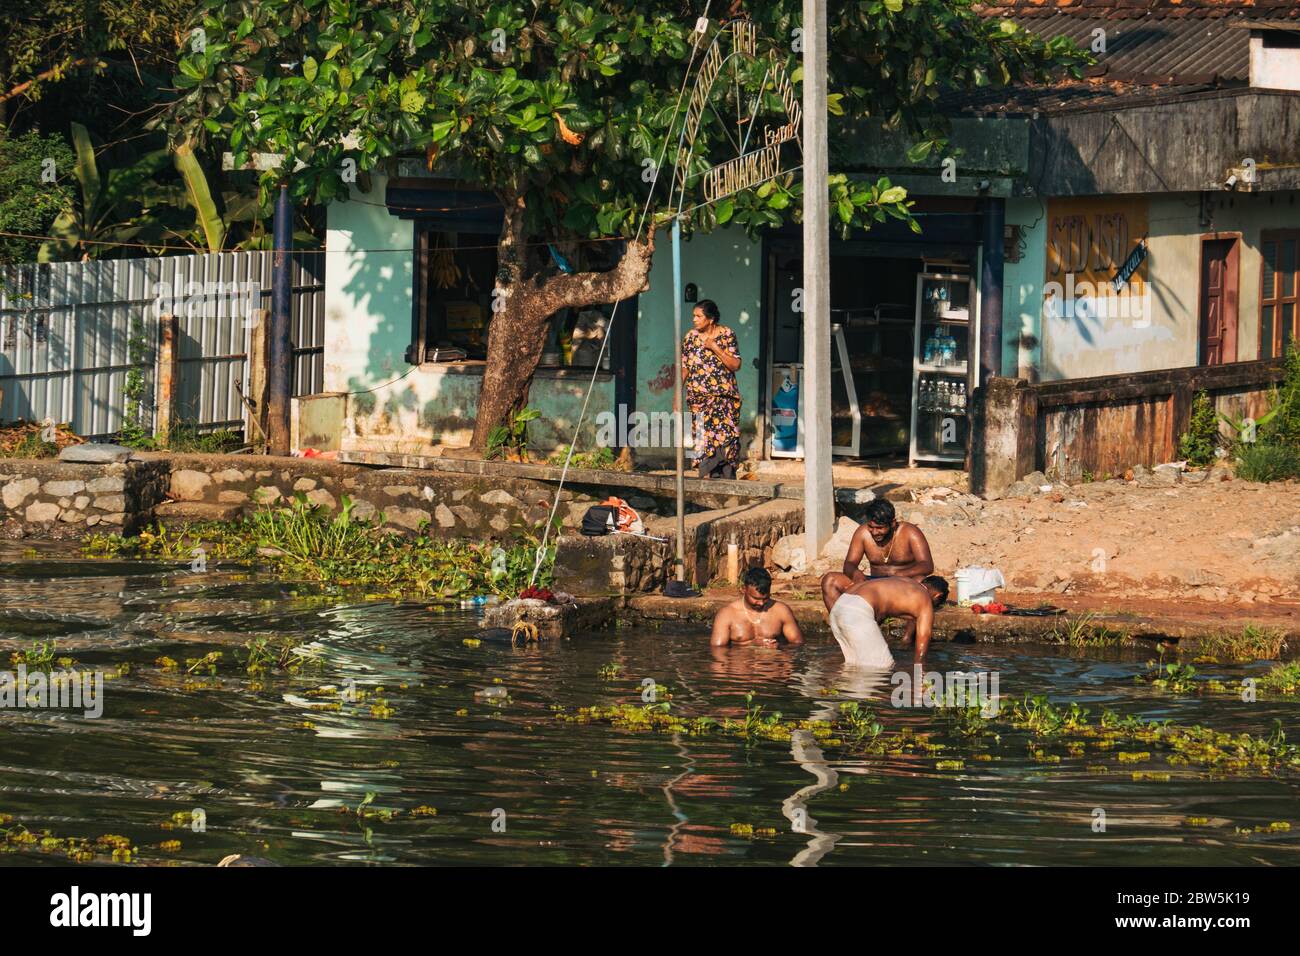 Three men bathe outside their home in the backwaters of Kerala, India on a sunny evening Stock Photo